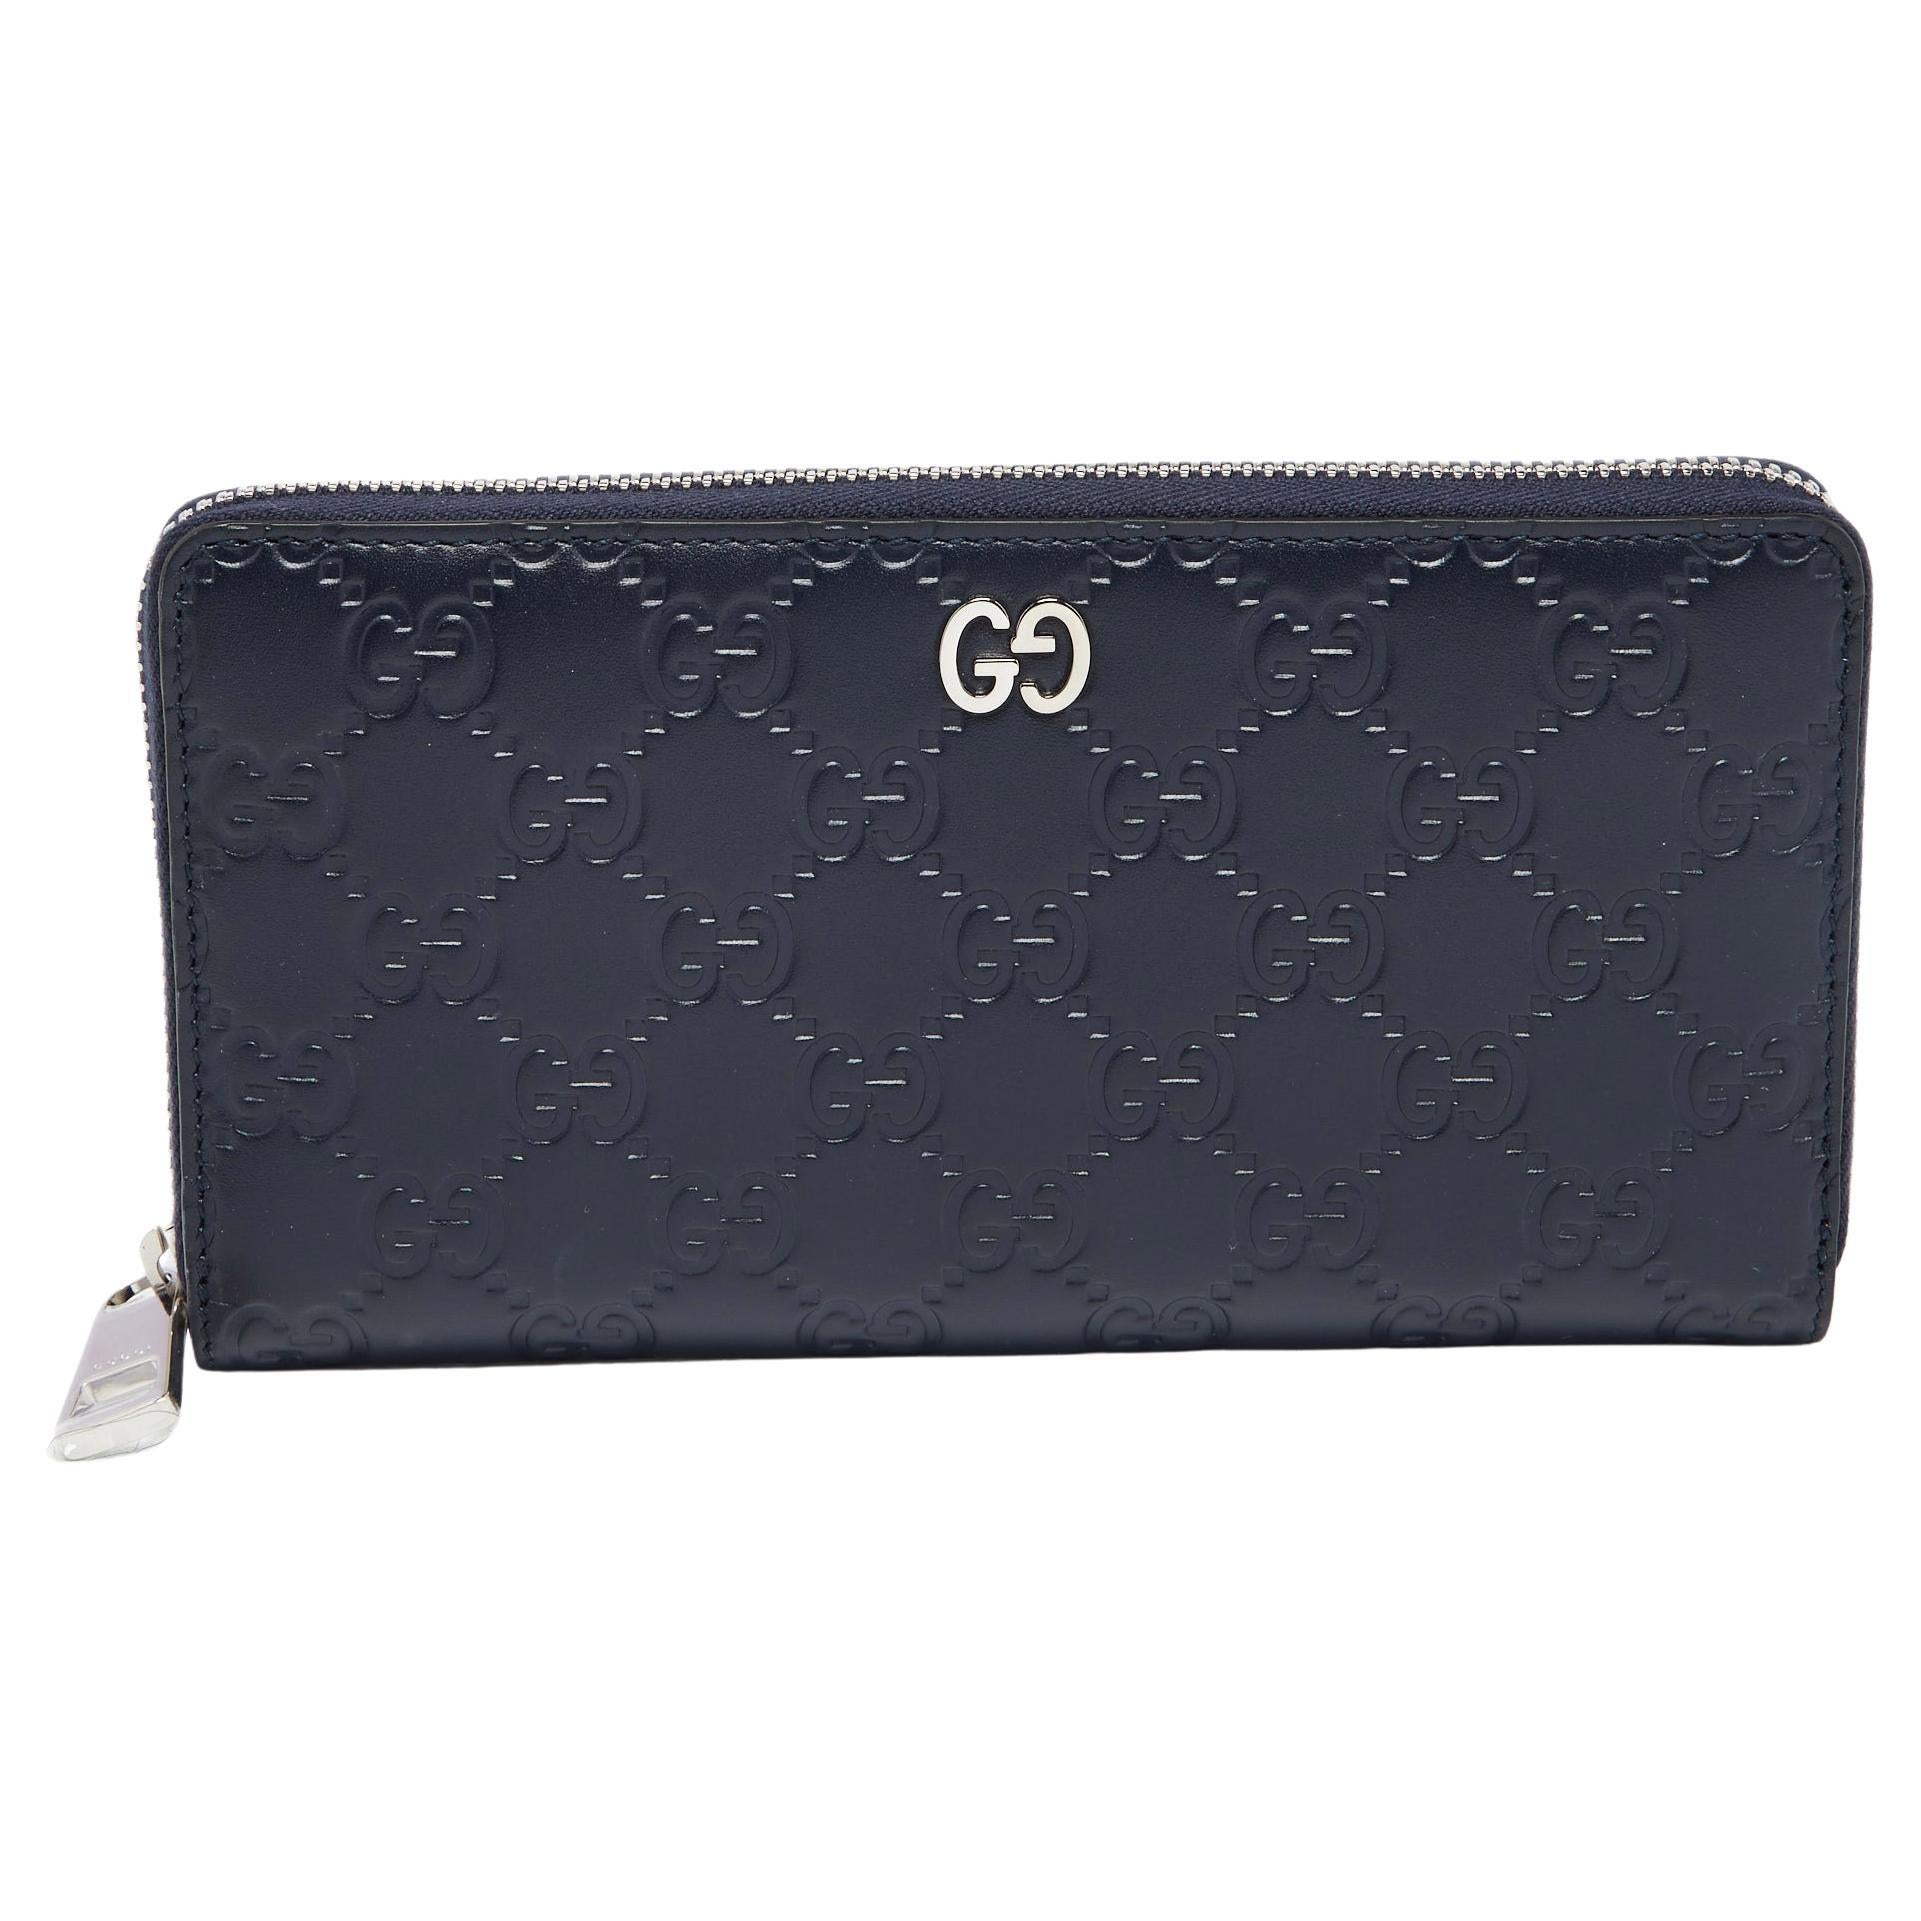 Gucci Navy Blue Guccissima Leather GG Signature Zip Around Continental Wallet